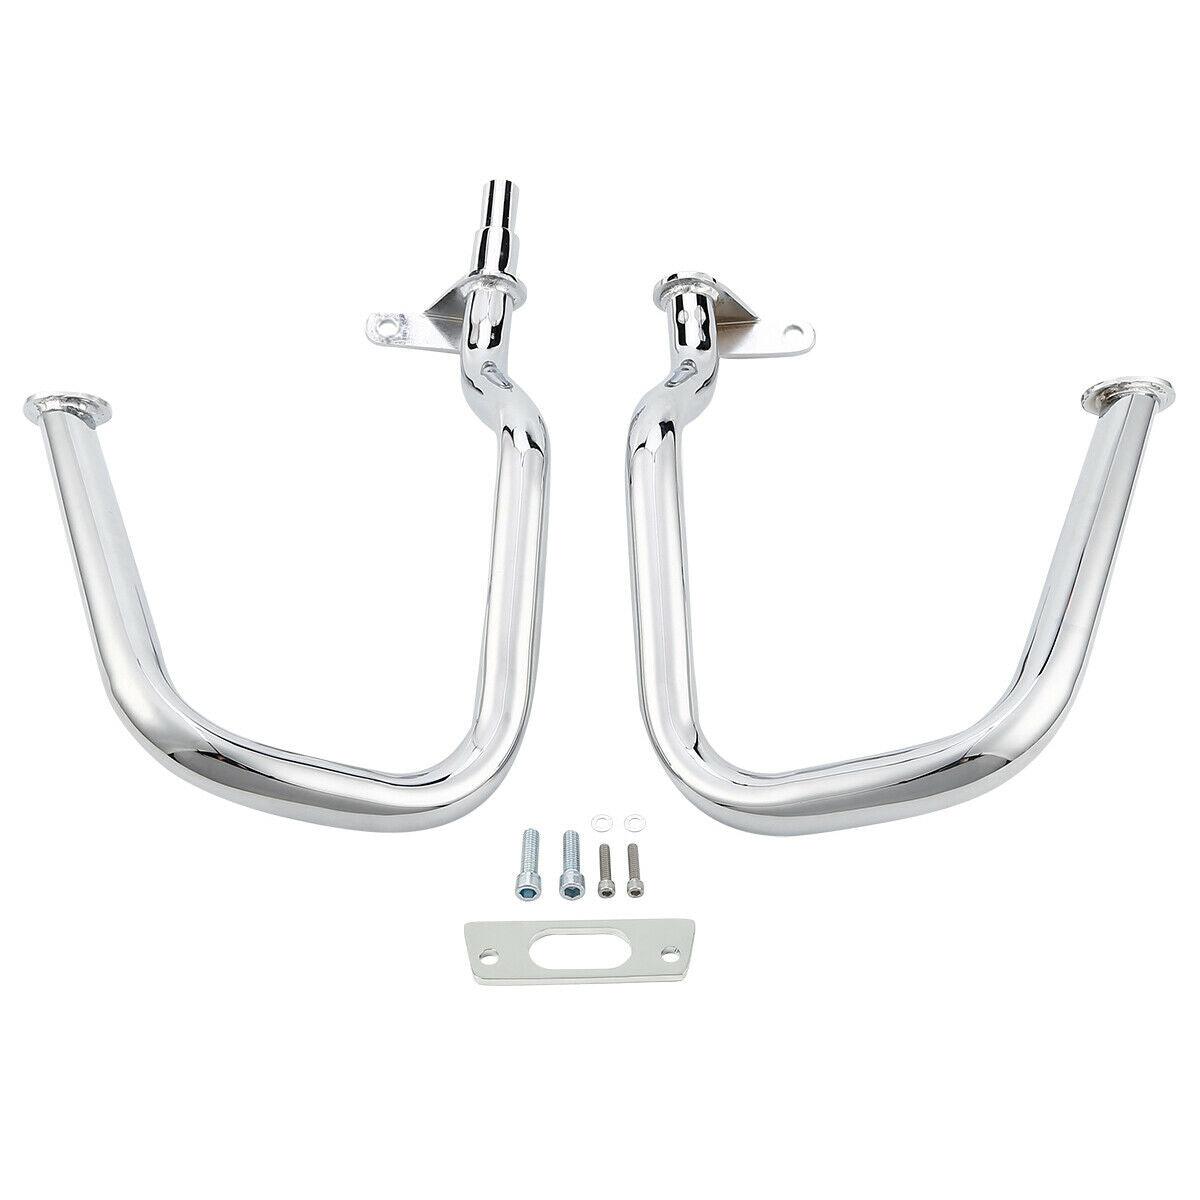 Chrome Chopped Engine Guard Crash Bar Fit For Harley Street Glide Road King 14+ - Moto Life Products